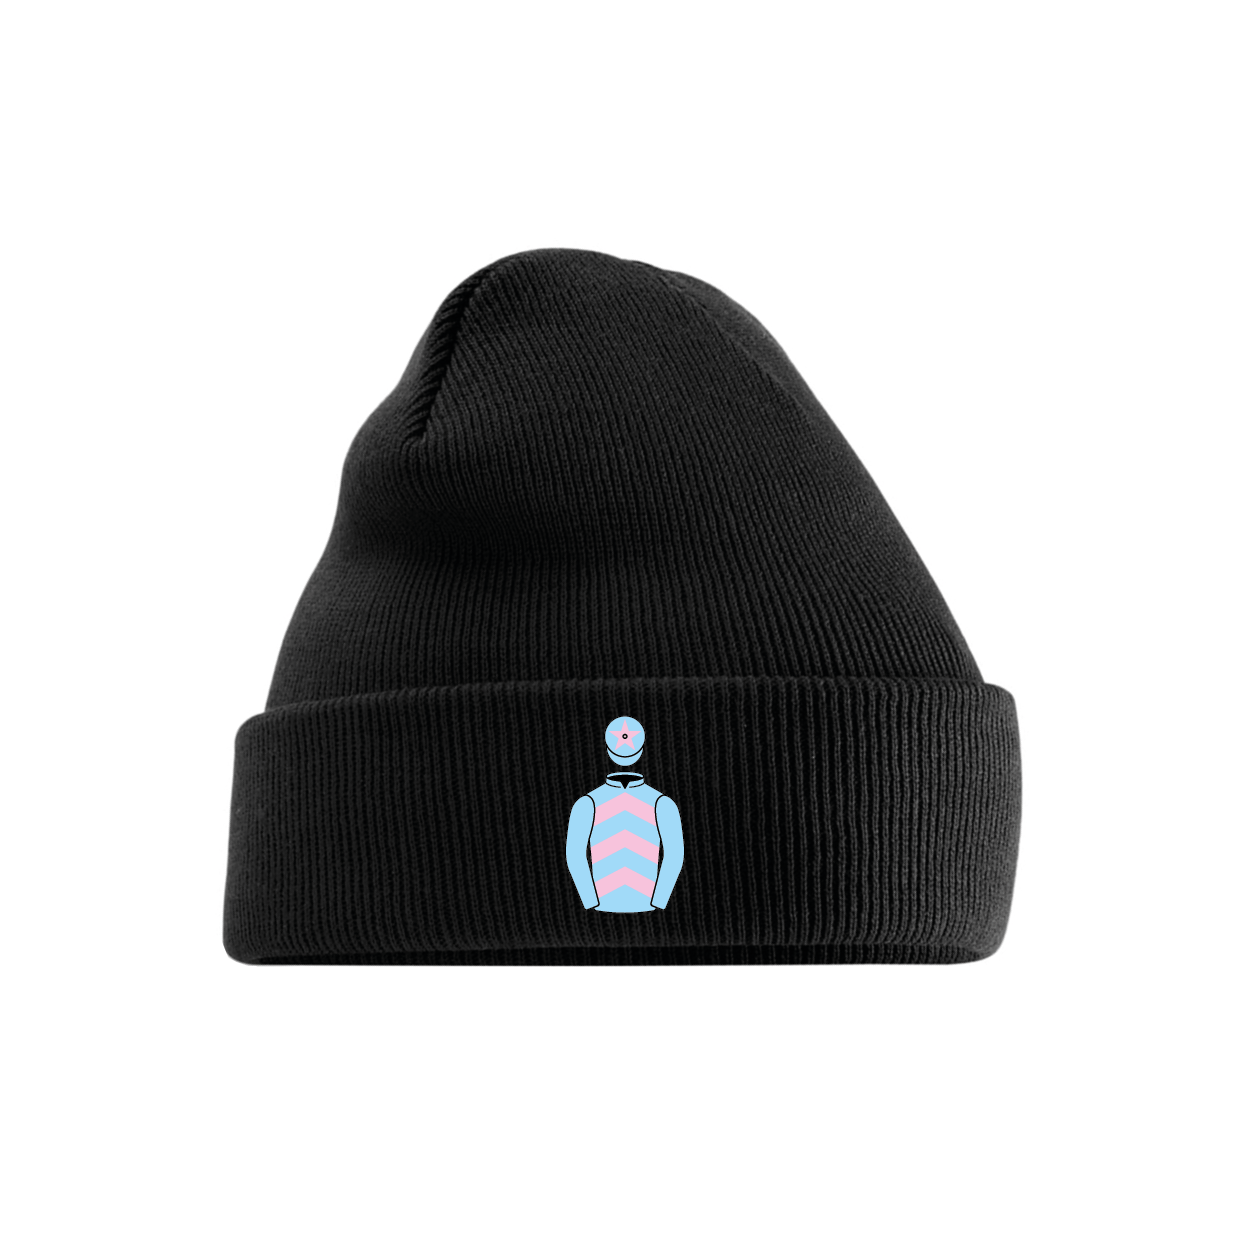 R S Brookhouse Embroidered Cuffed Beanie - Hacked Up